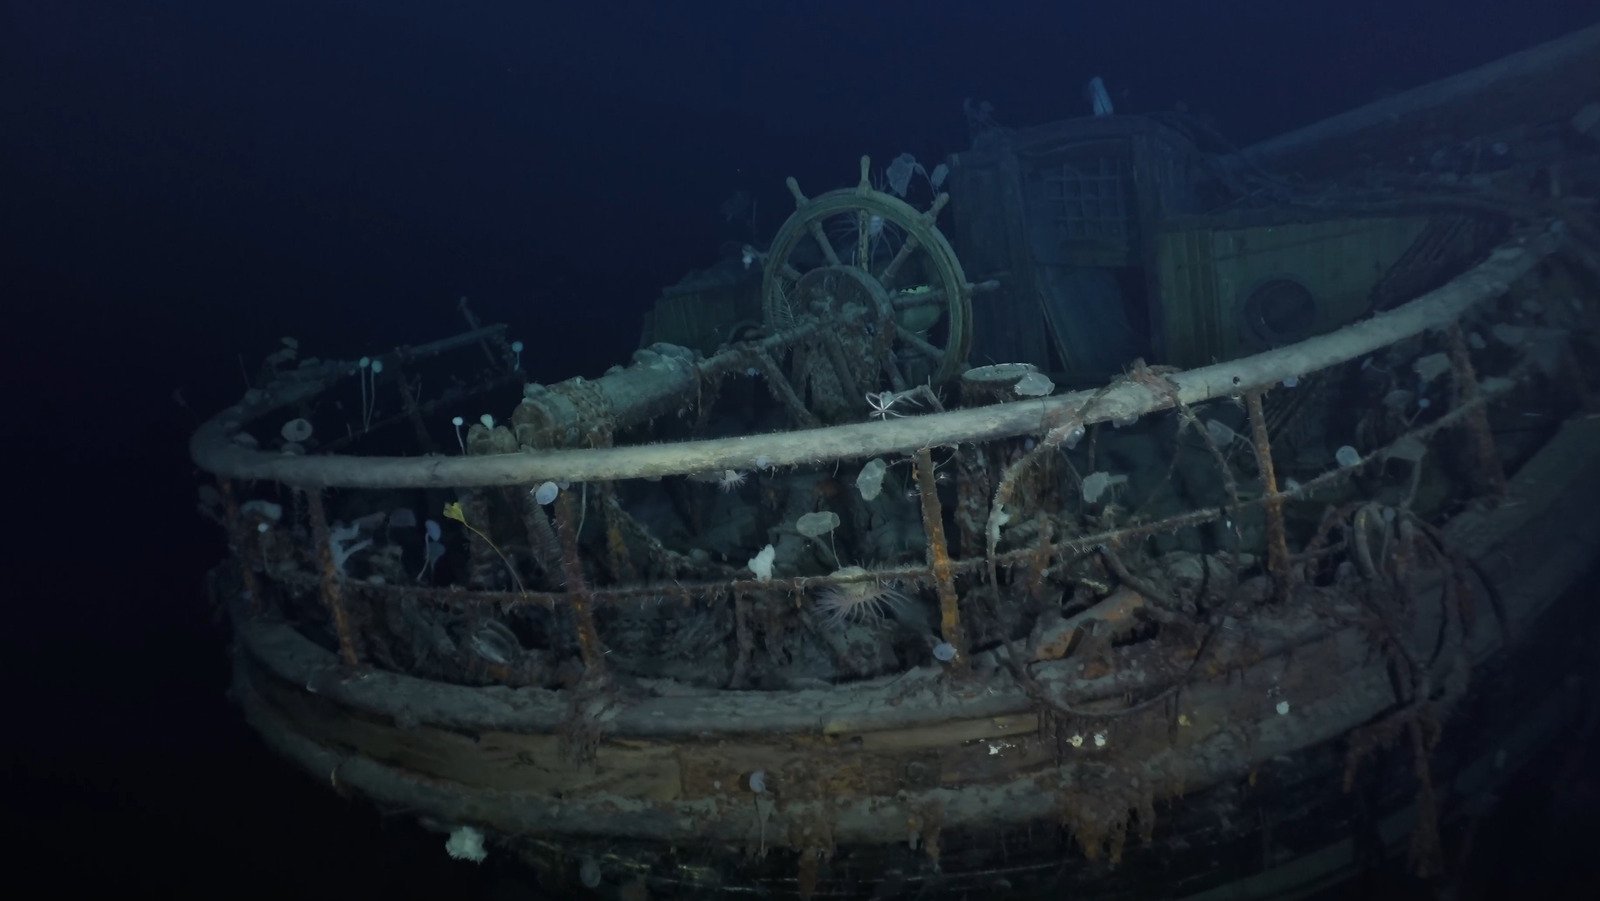 Twitter Is Freaking Out Over The Discovery Of Endurance Shipwreck